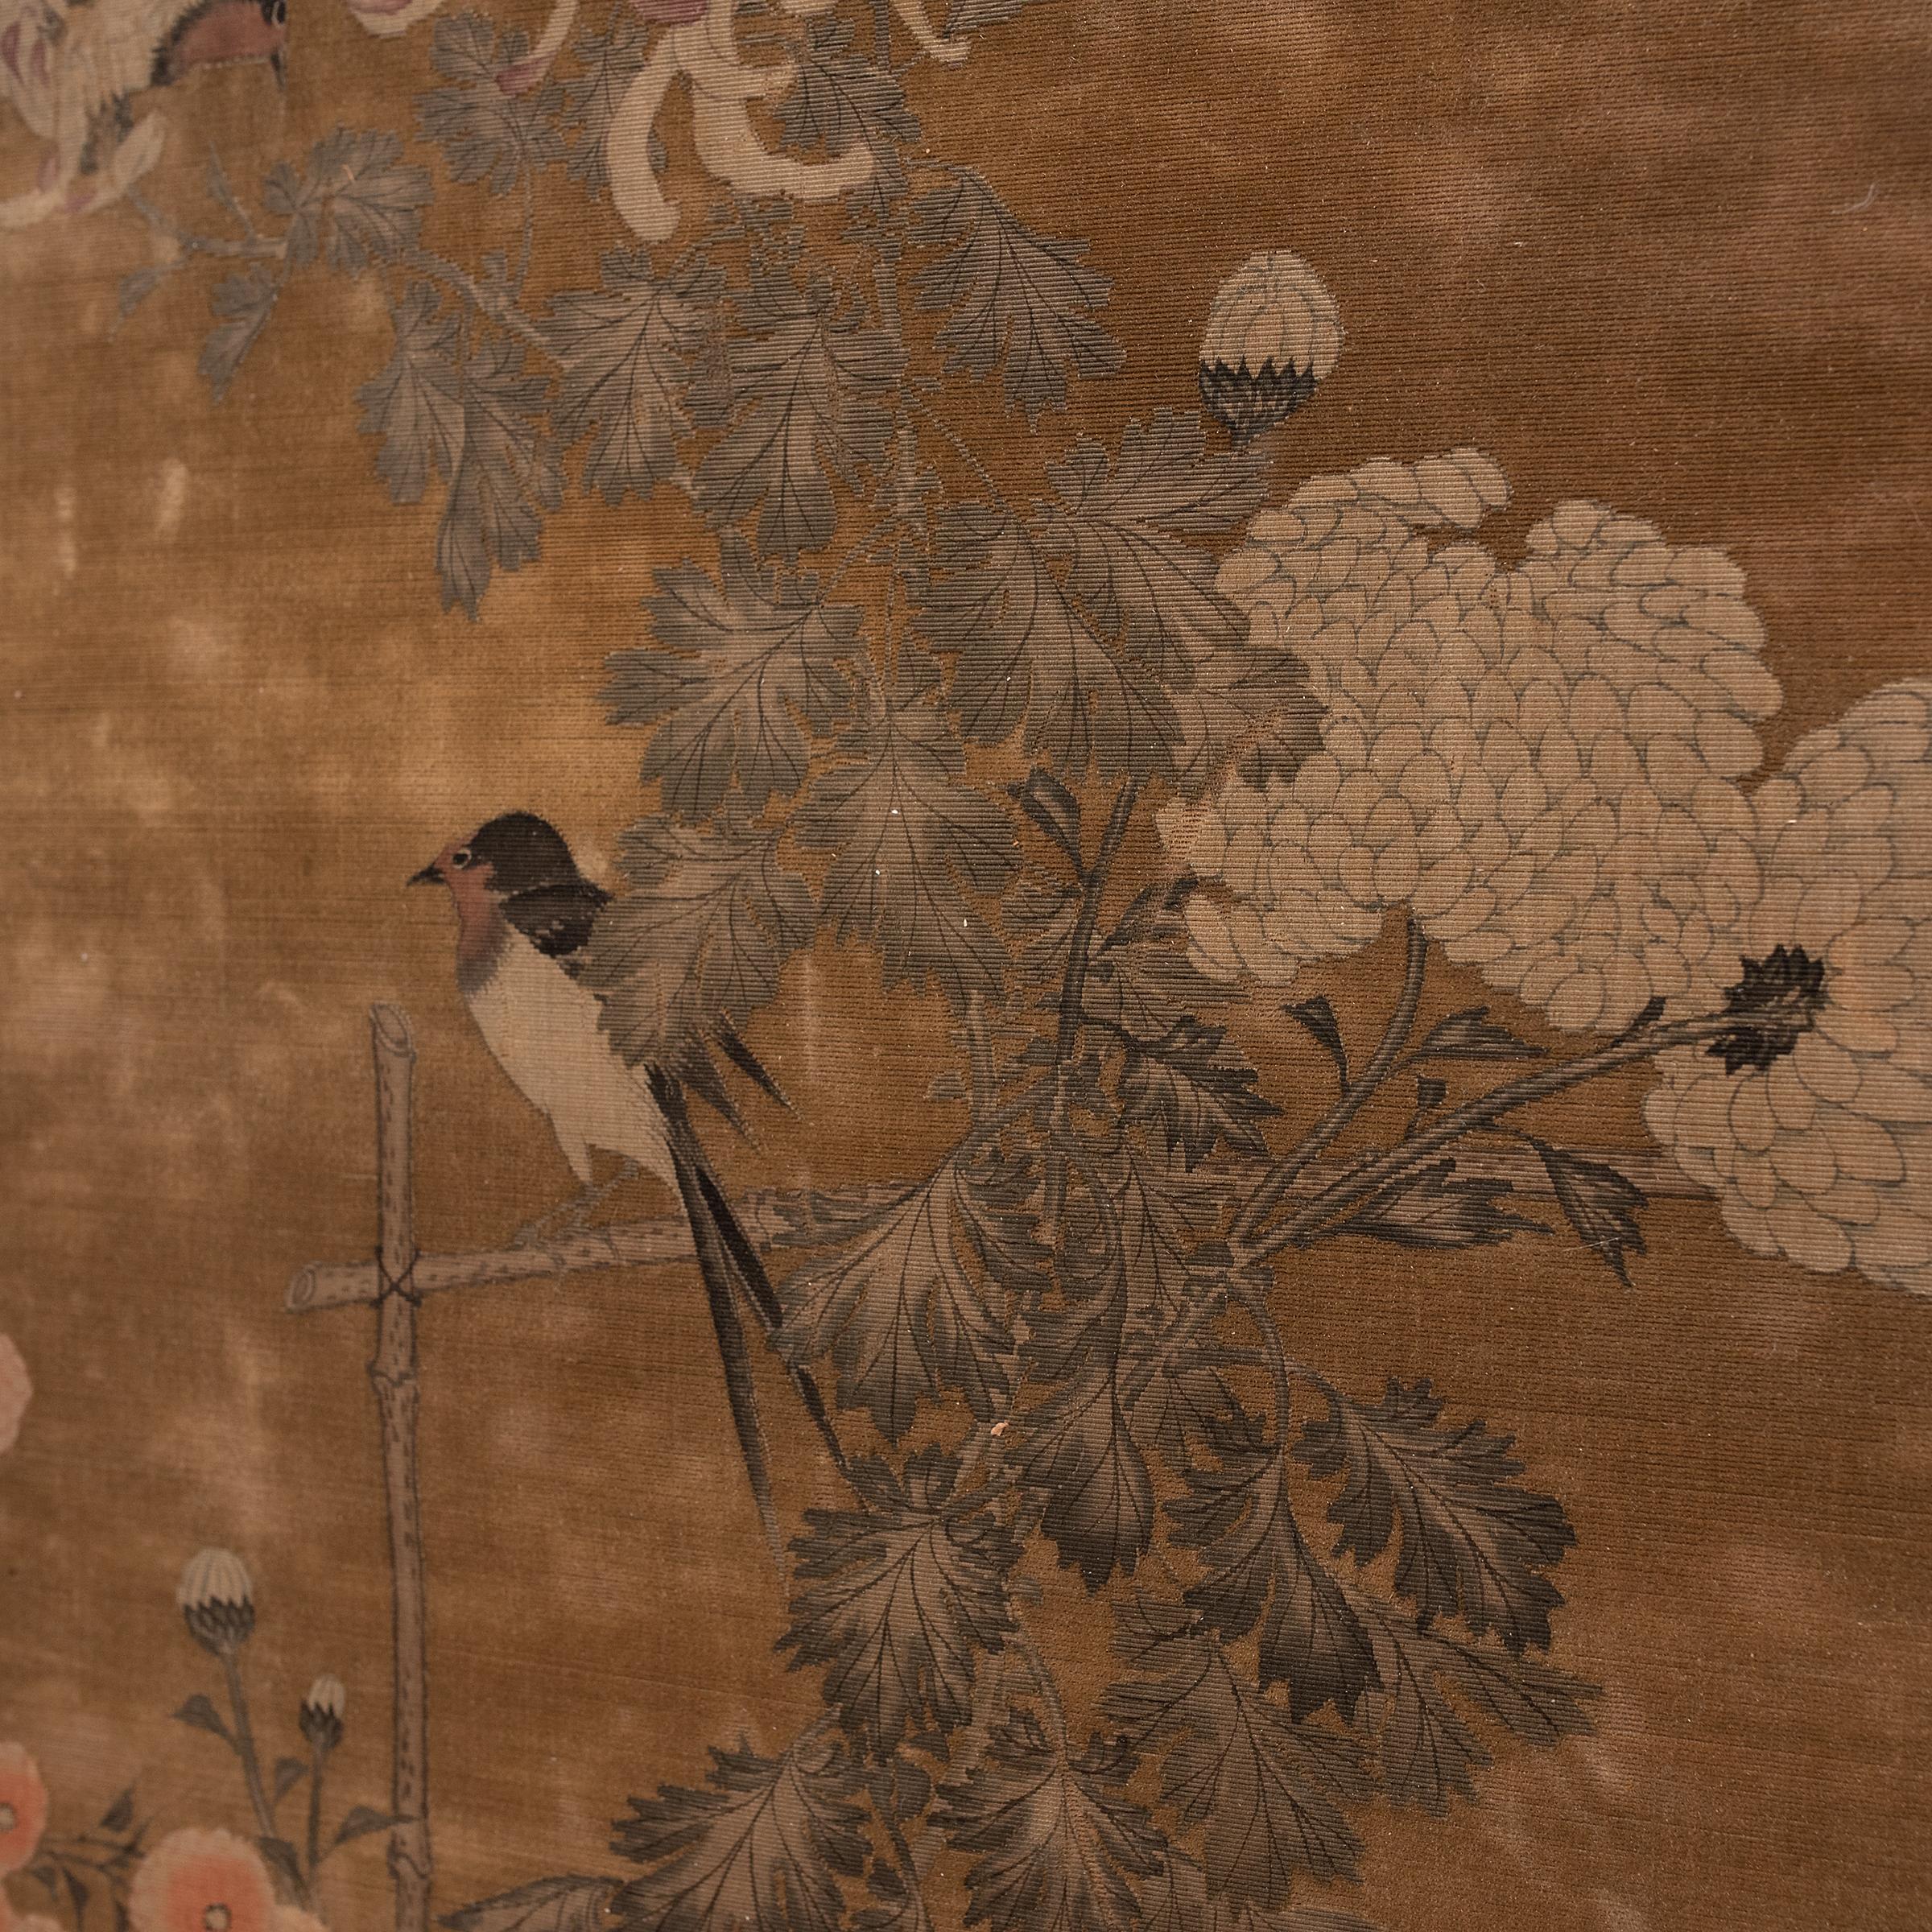 This beautiful gold-toned painting on silk and velvet is originally from a 19th-century Japanese handscroll. The painting depicts a quiet scene of two black and white magpies flitting amidst chrysanthemum, beautifully drawn with delicate linework